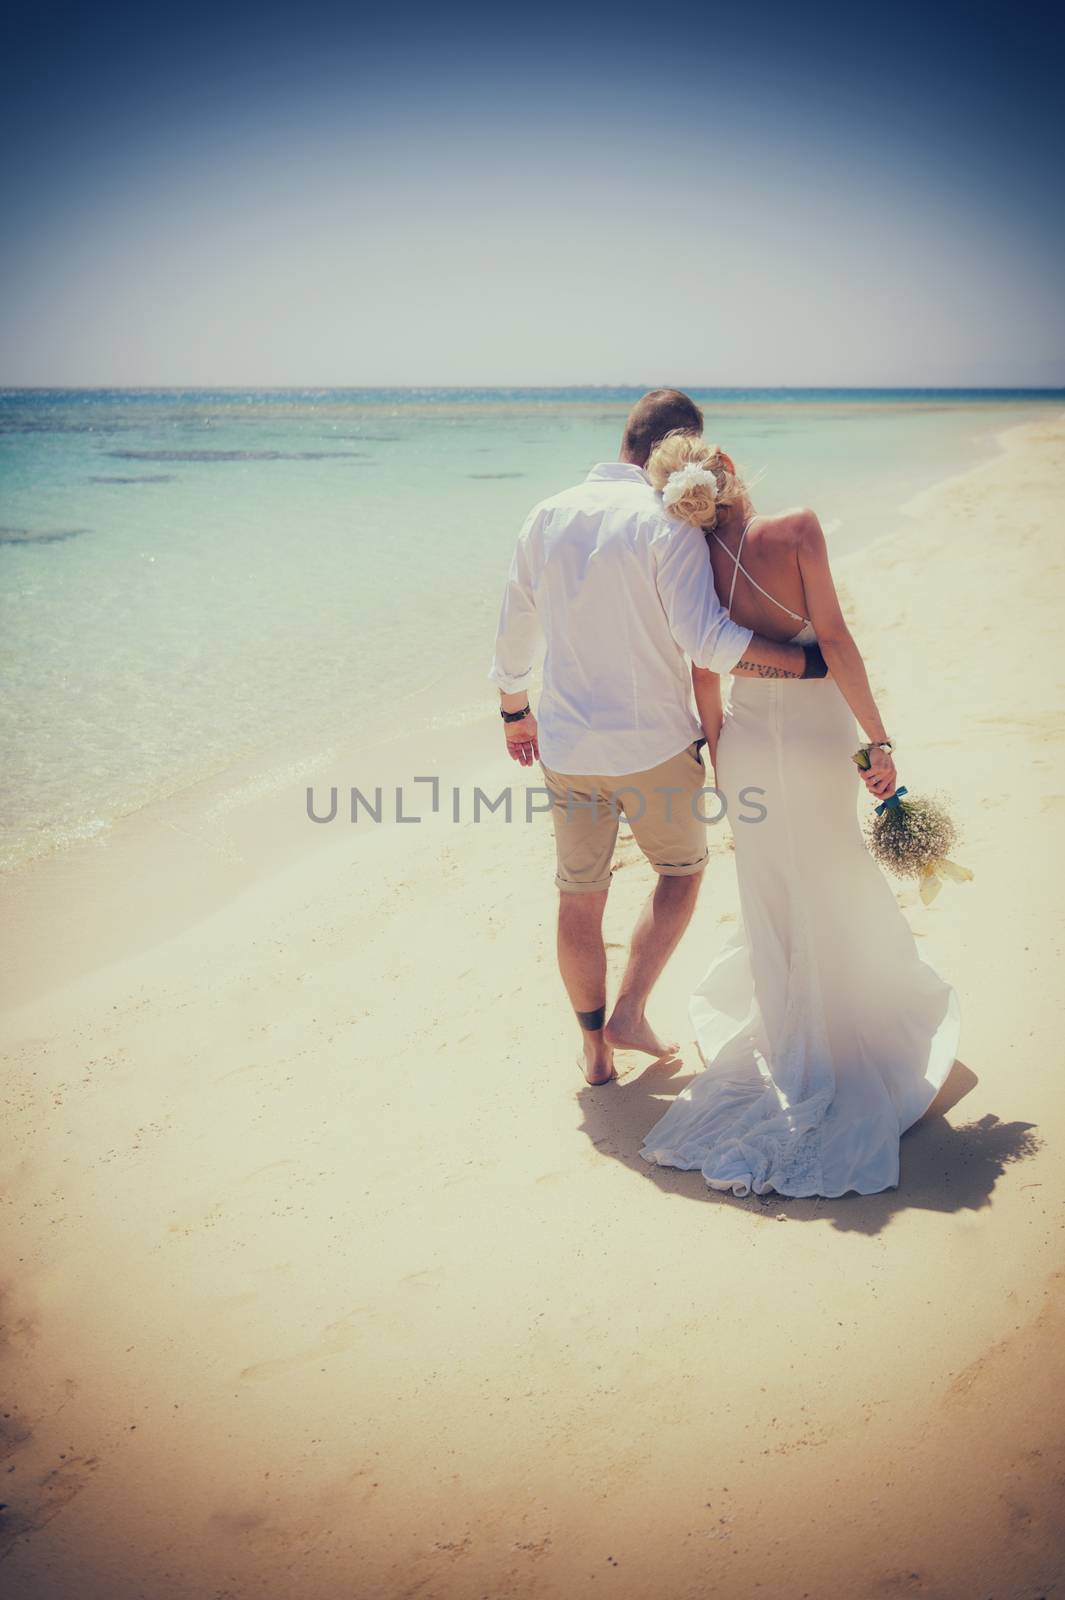 Beautiful married couple on a tropical beach wedding day by paulvinten